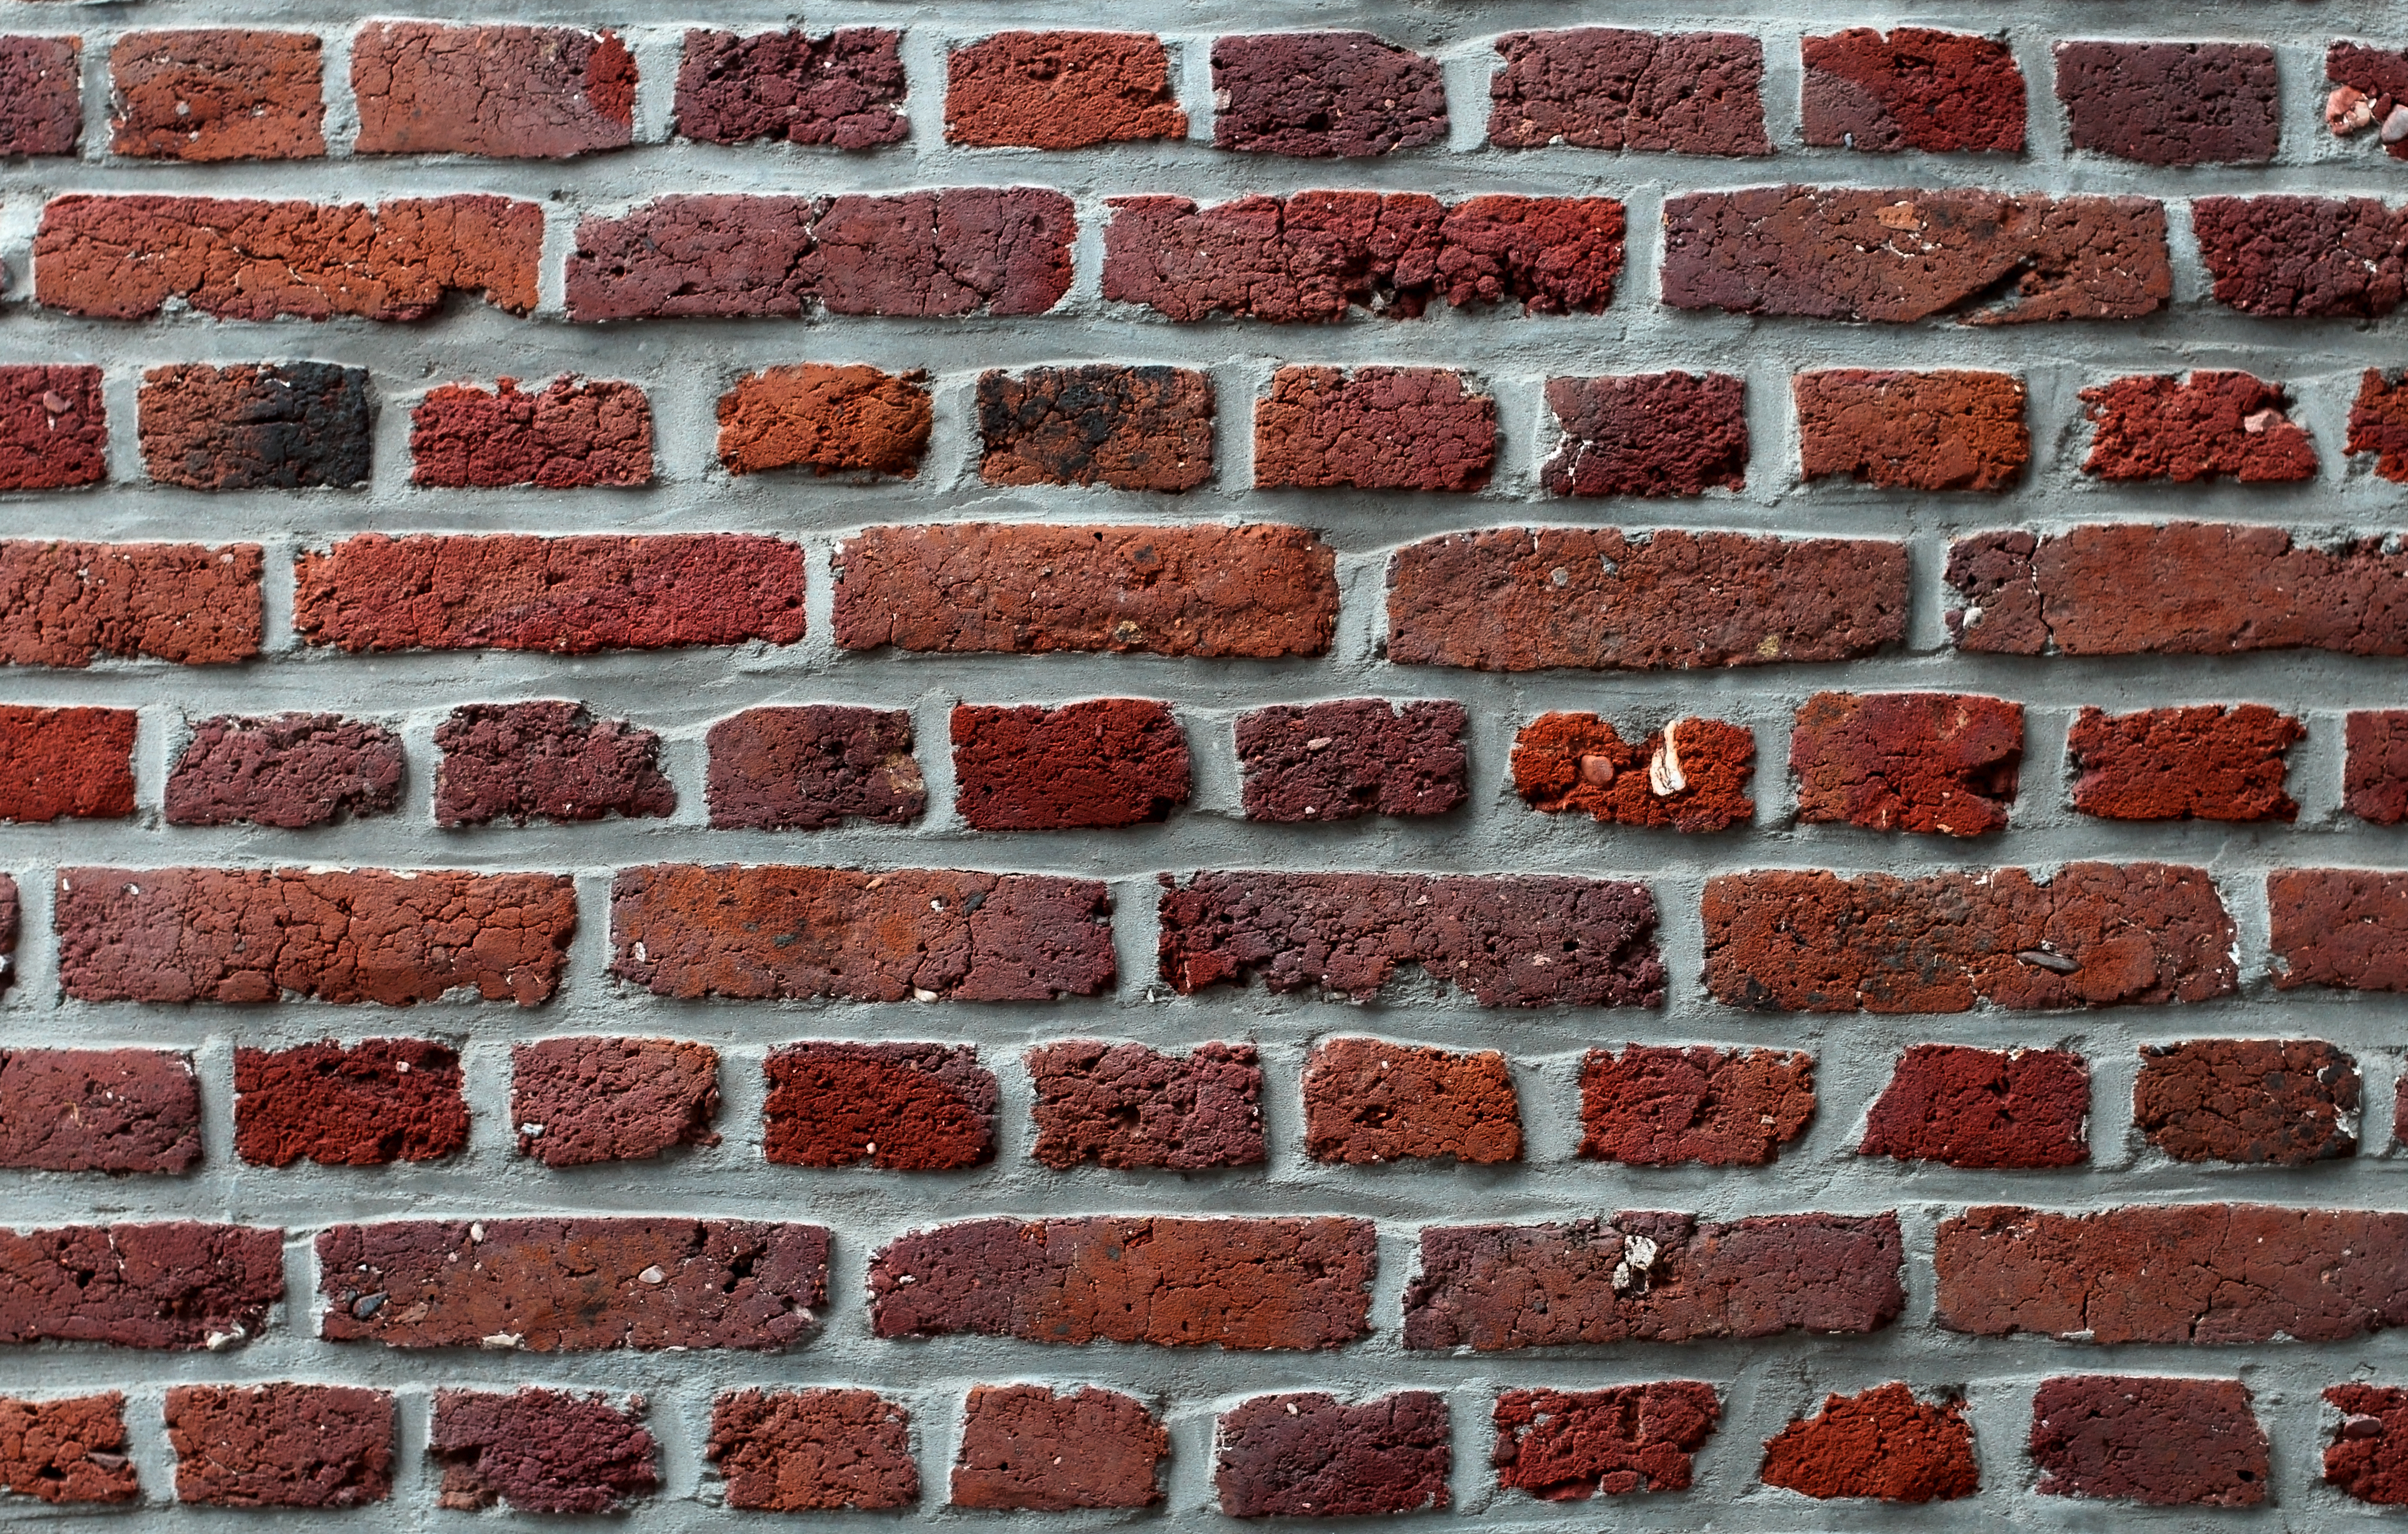 File:Red brick wall texture.JPG - Wikimedia Commons